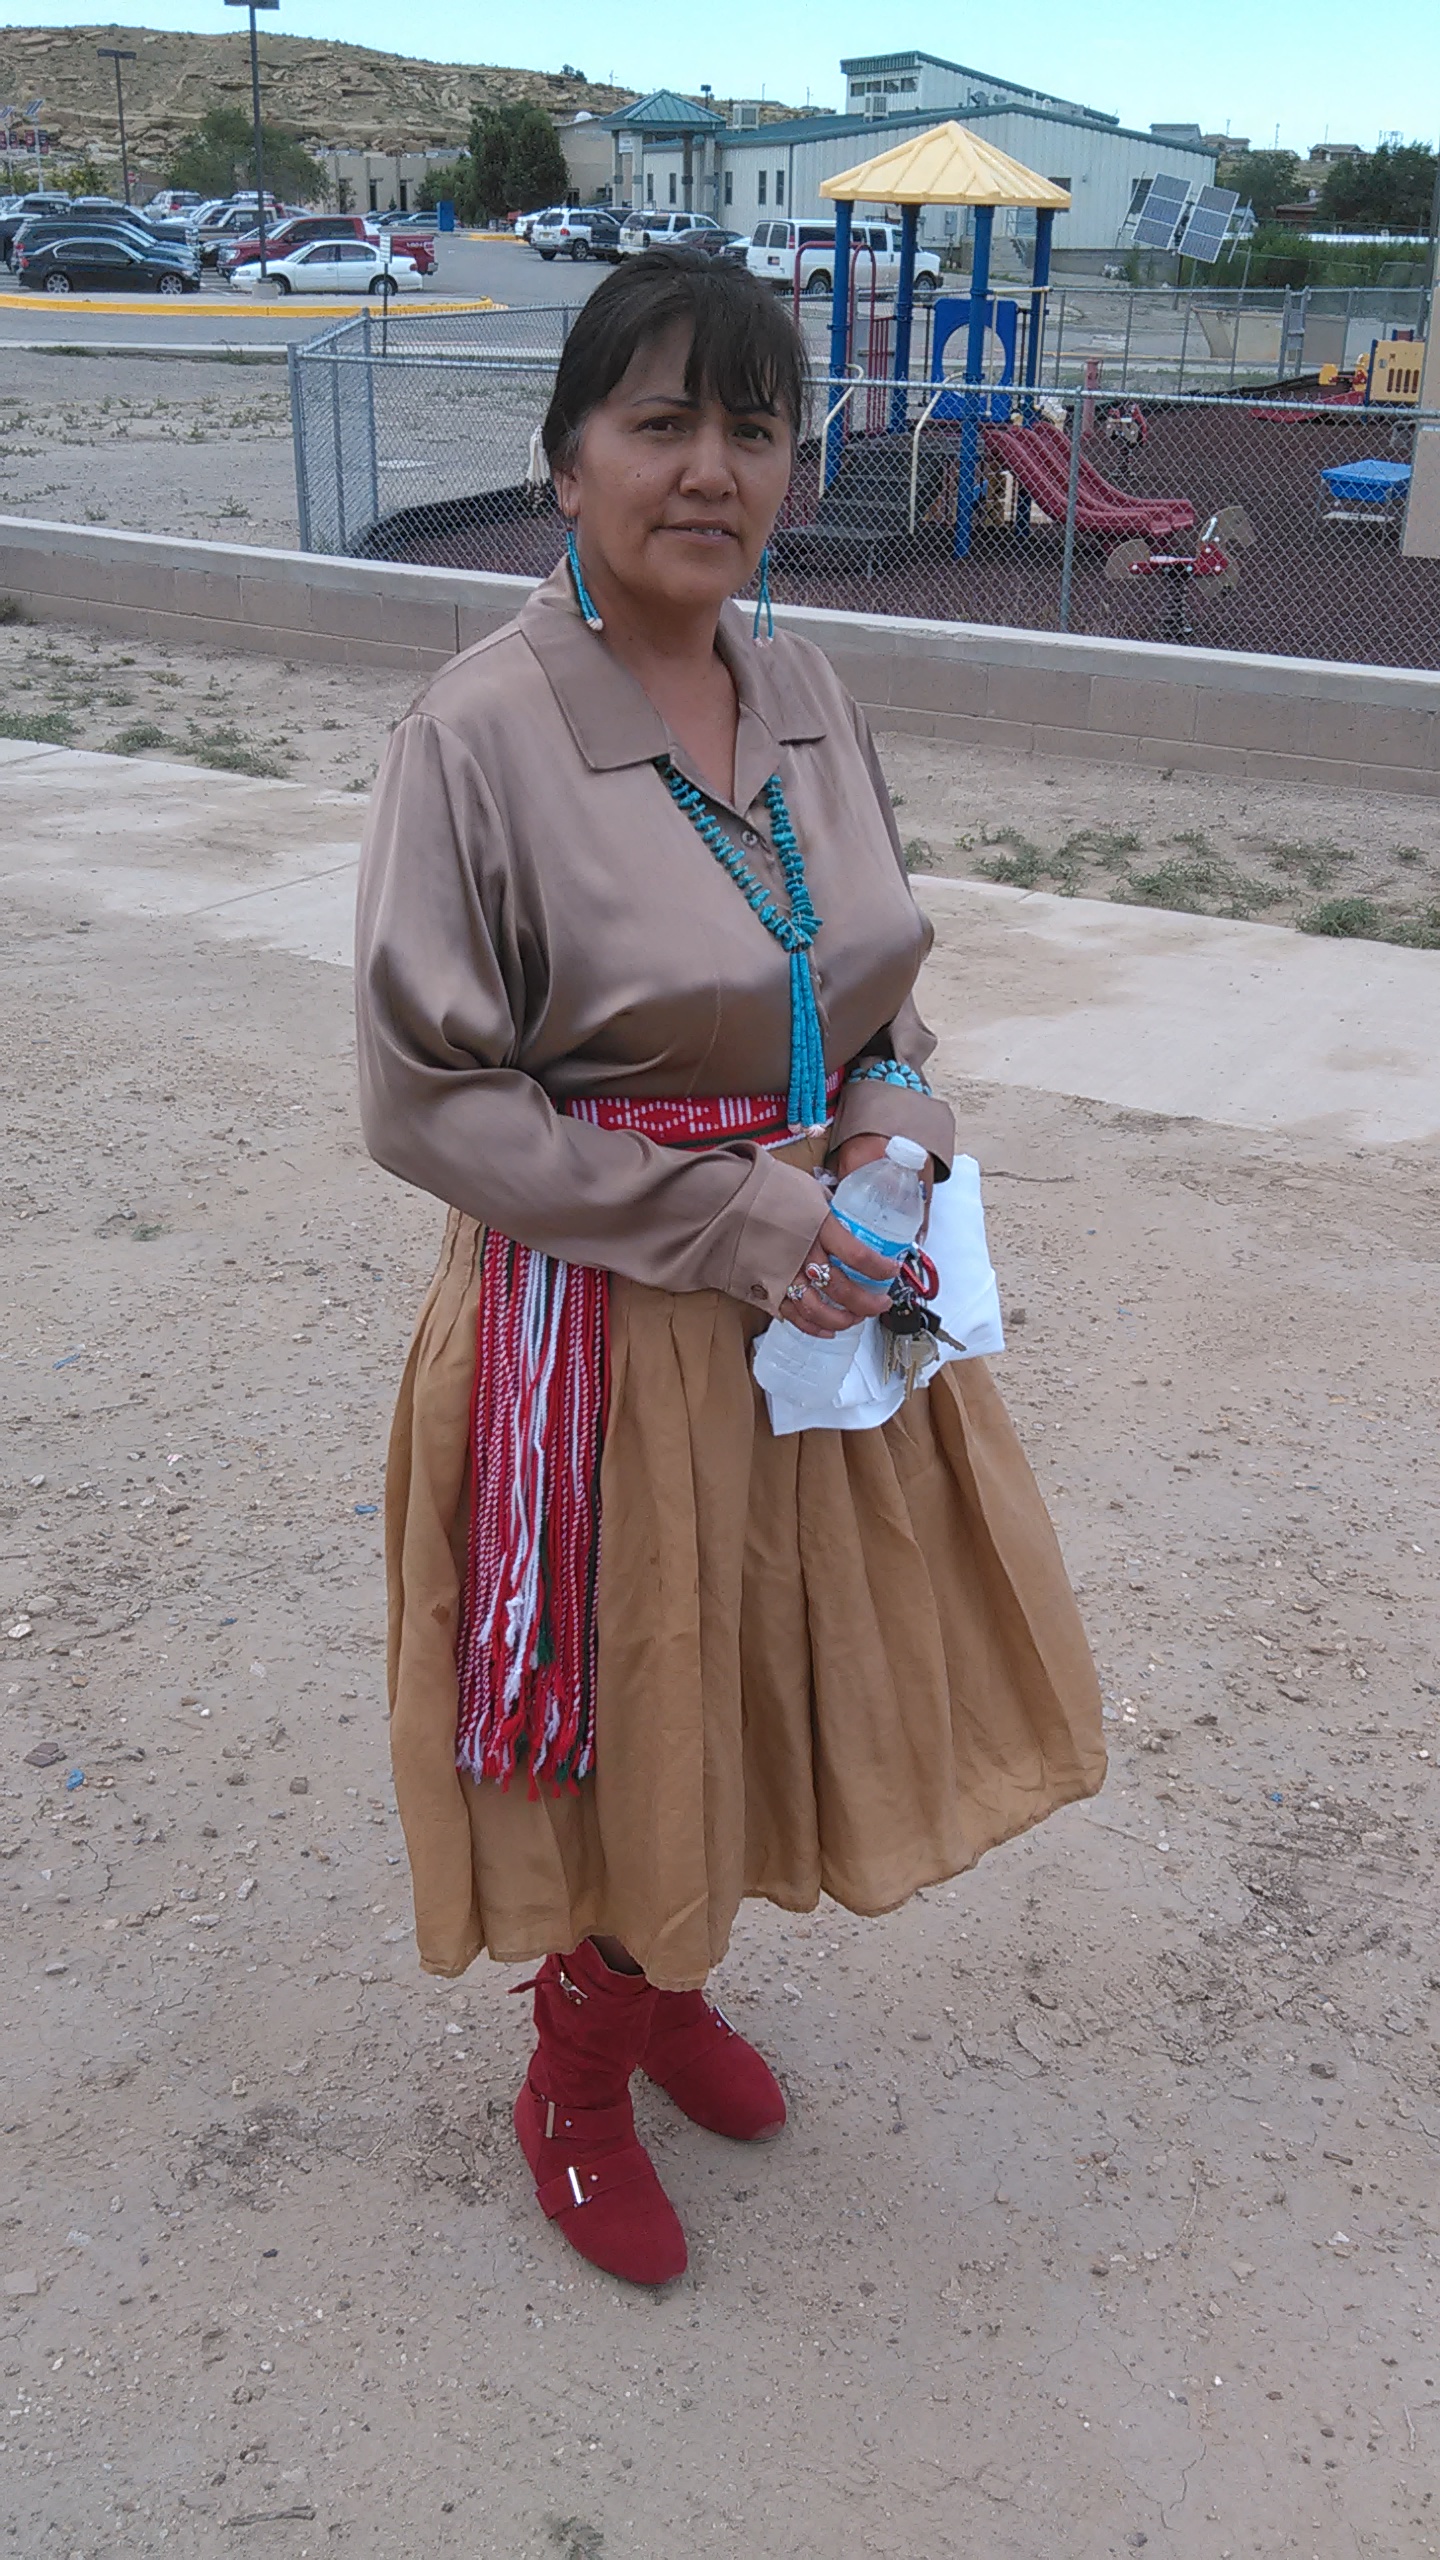 Marcella on the campus of Navajo Technical University.